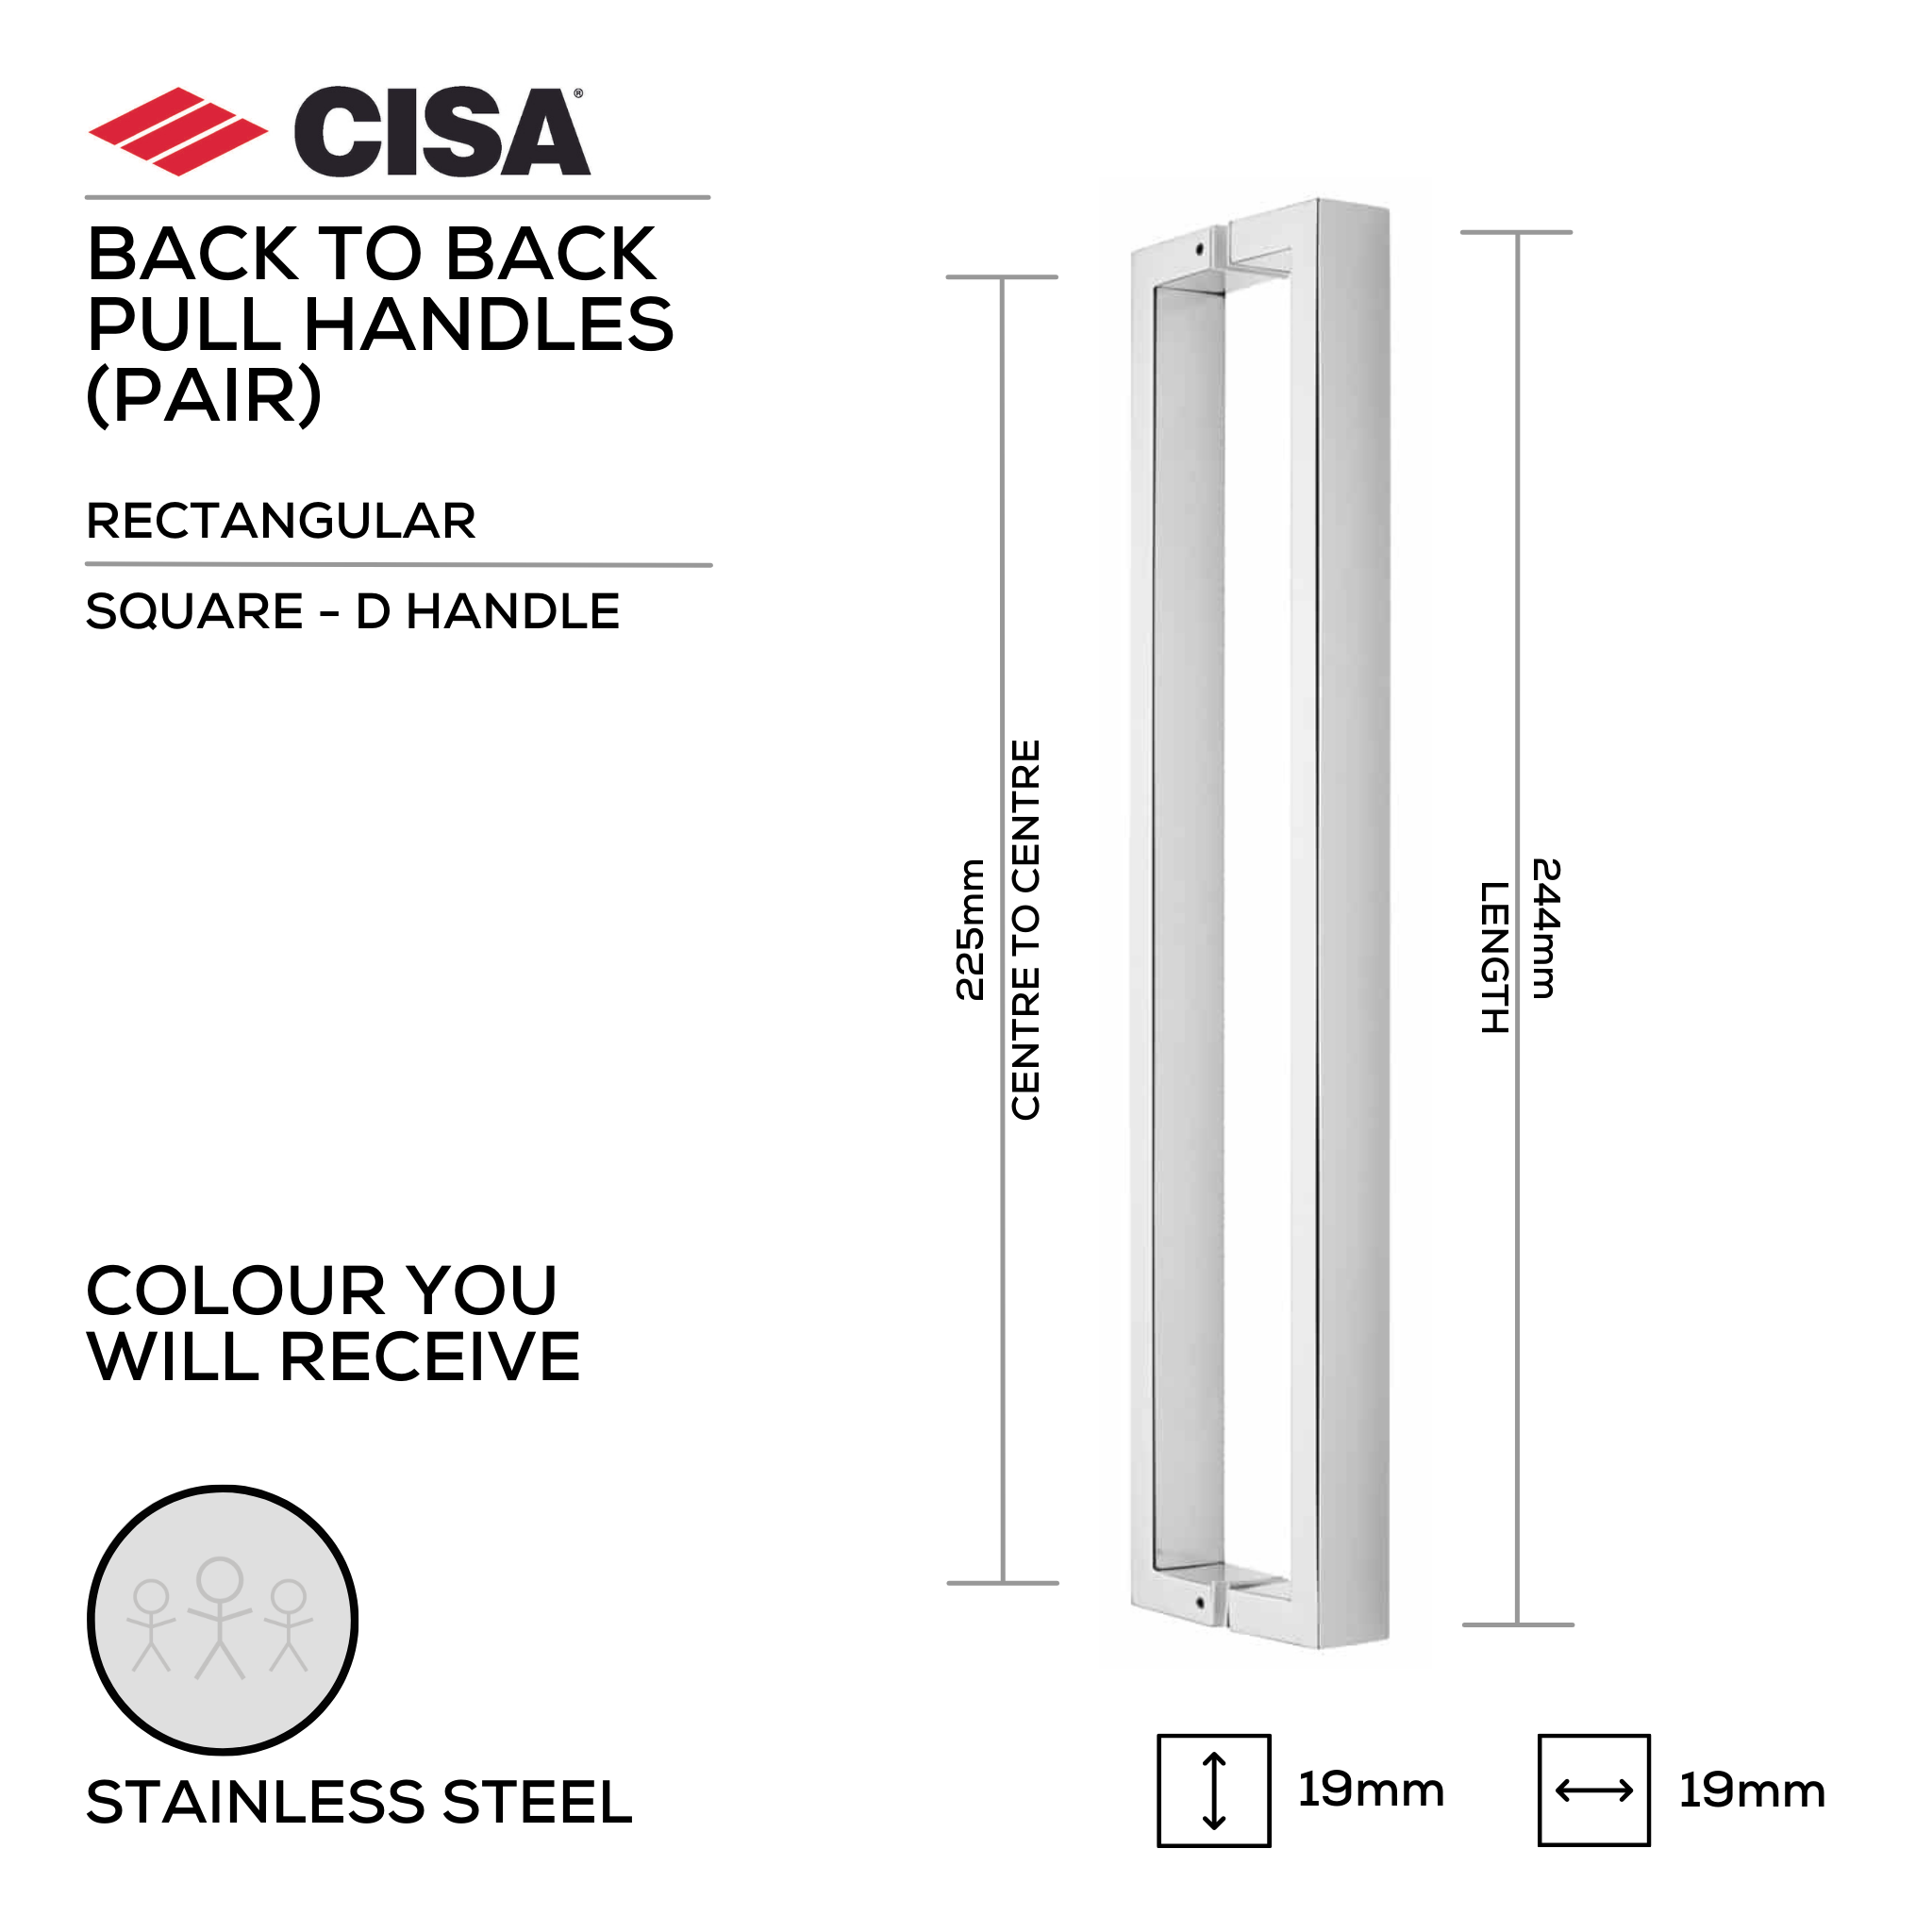 FP.SD01.BB.SS, Pull Handle, Square, D Handle, BTB, 19mm (Ø) x 244mm (l) x 225mm (ctc), Stainless Steel, CISA